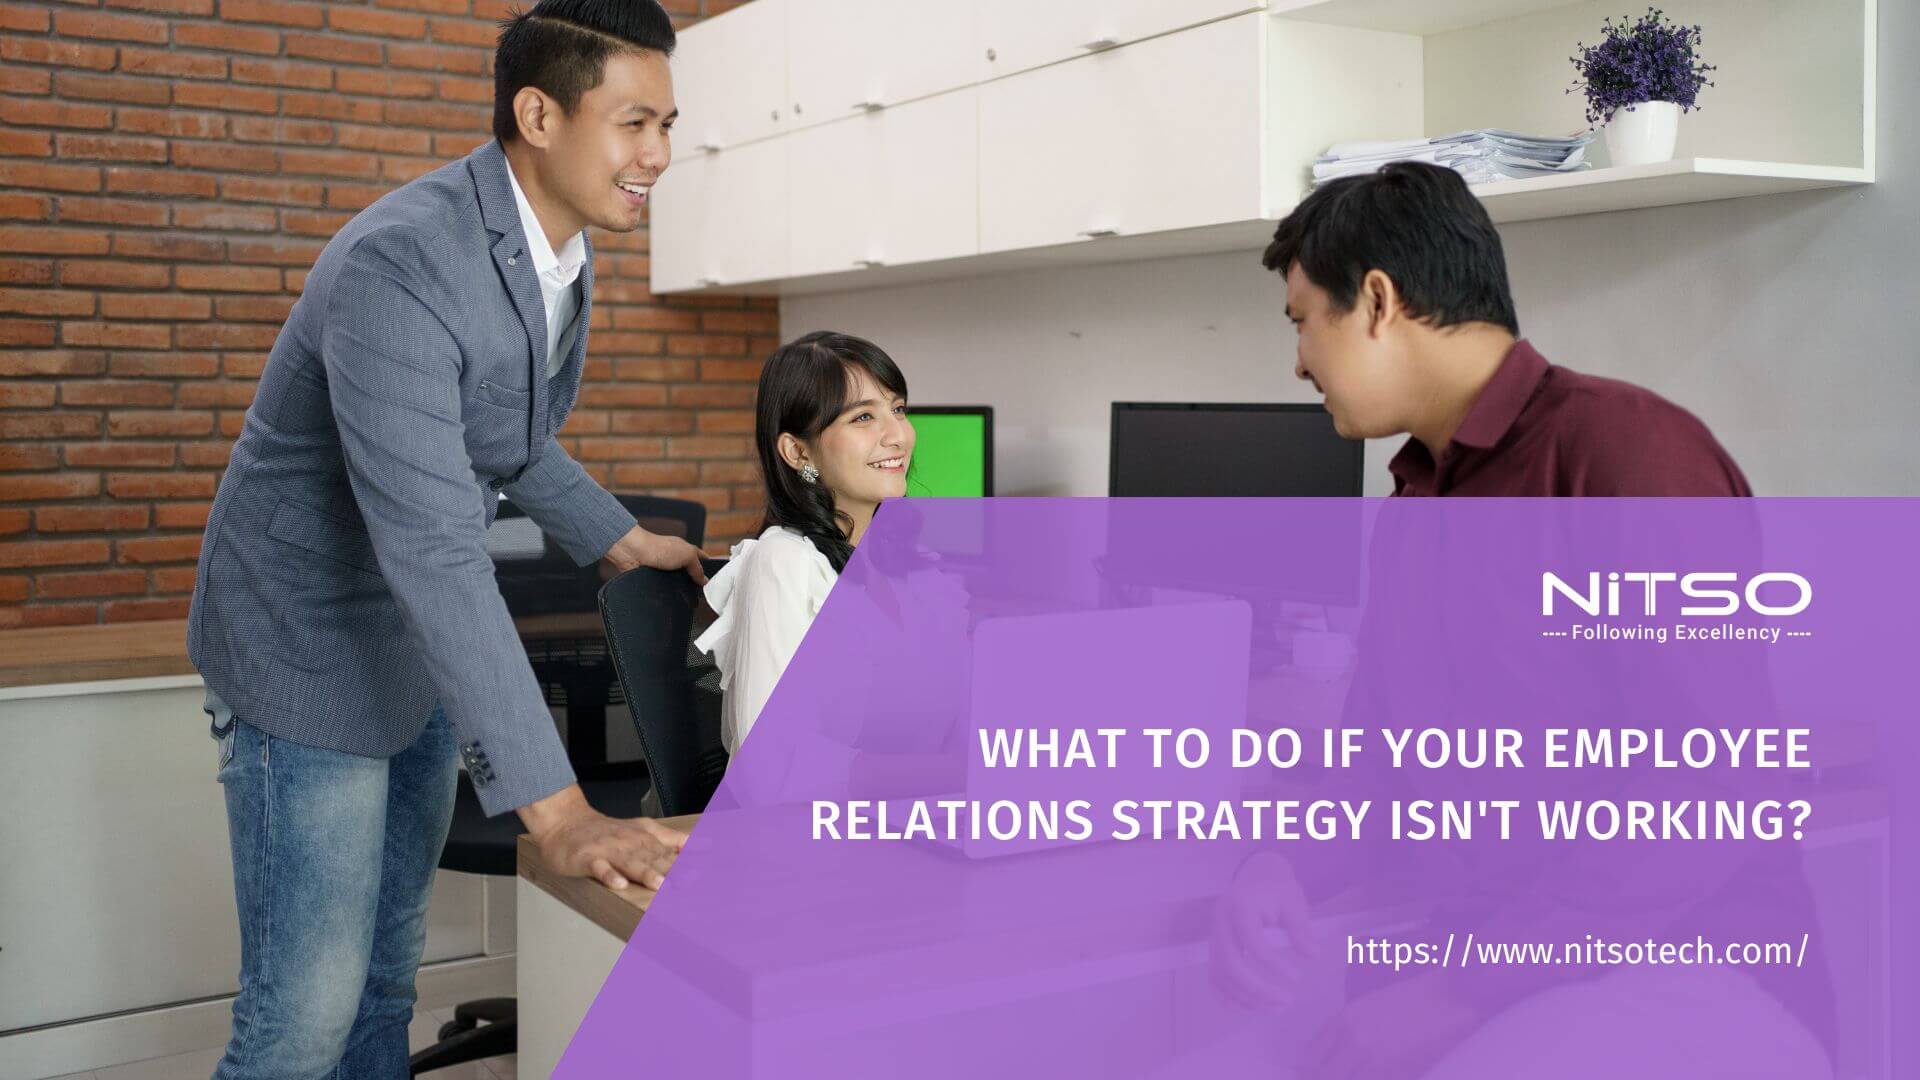 Not Getting Employee Relations Right? Here’s What To Do